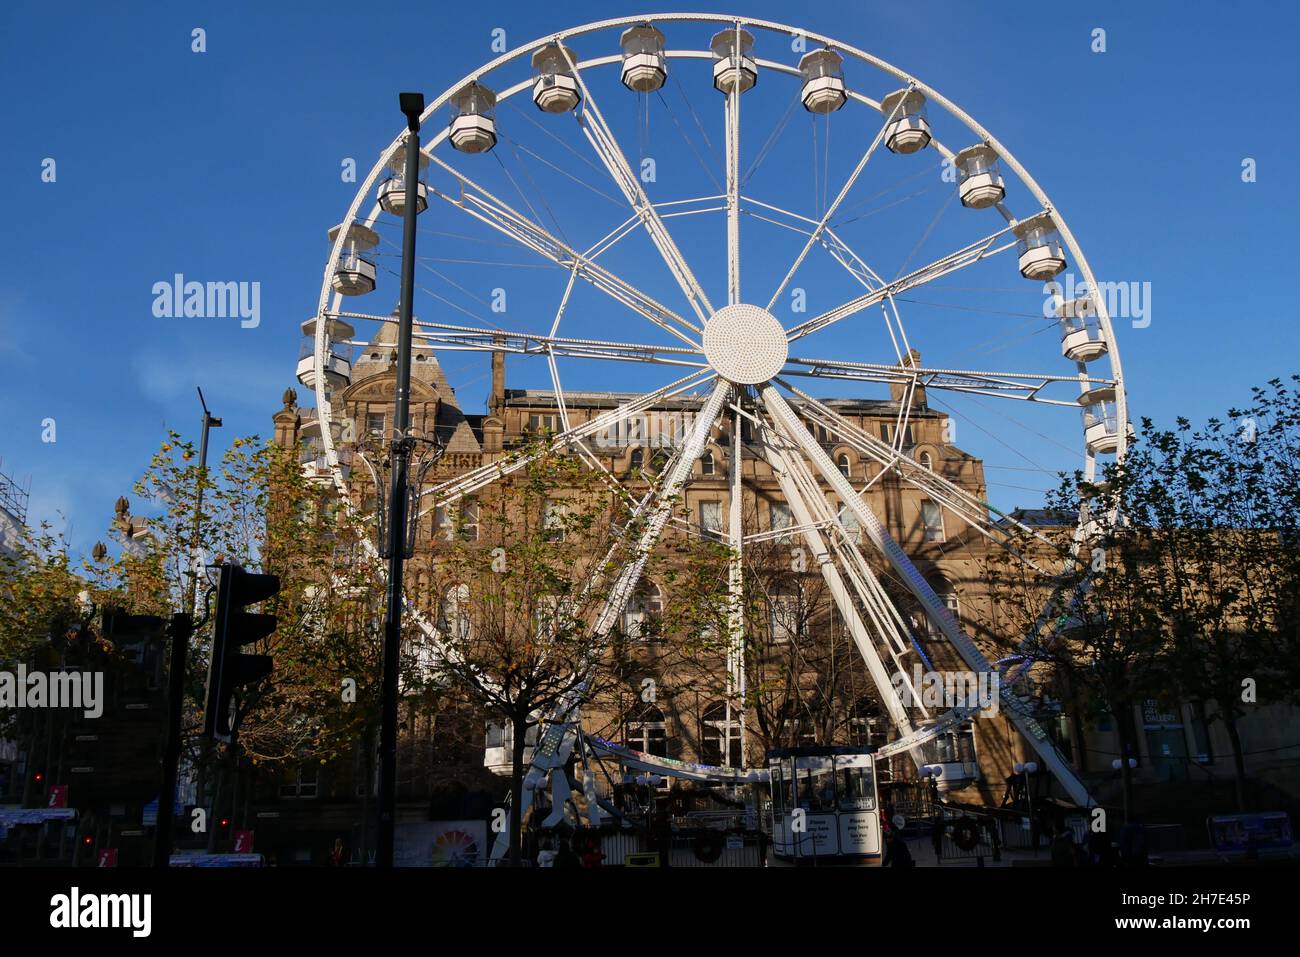 Large white ferris wheel with multiple viewing pods in front of large stone building small trees in foreground and blue sky Stock Photo